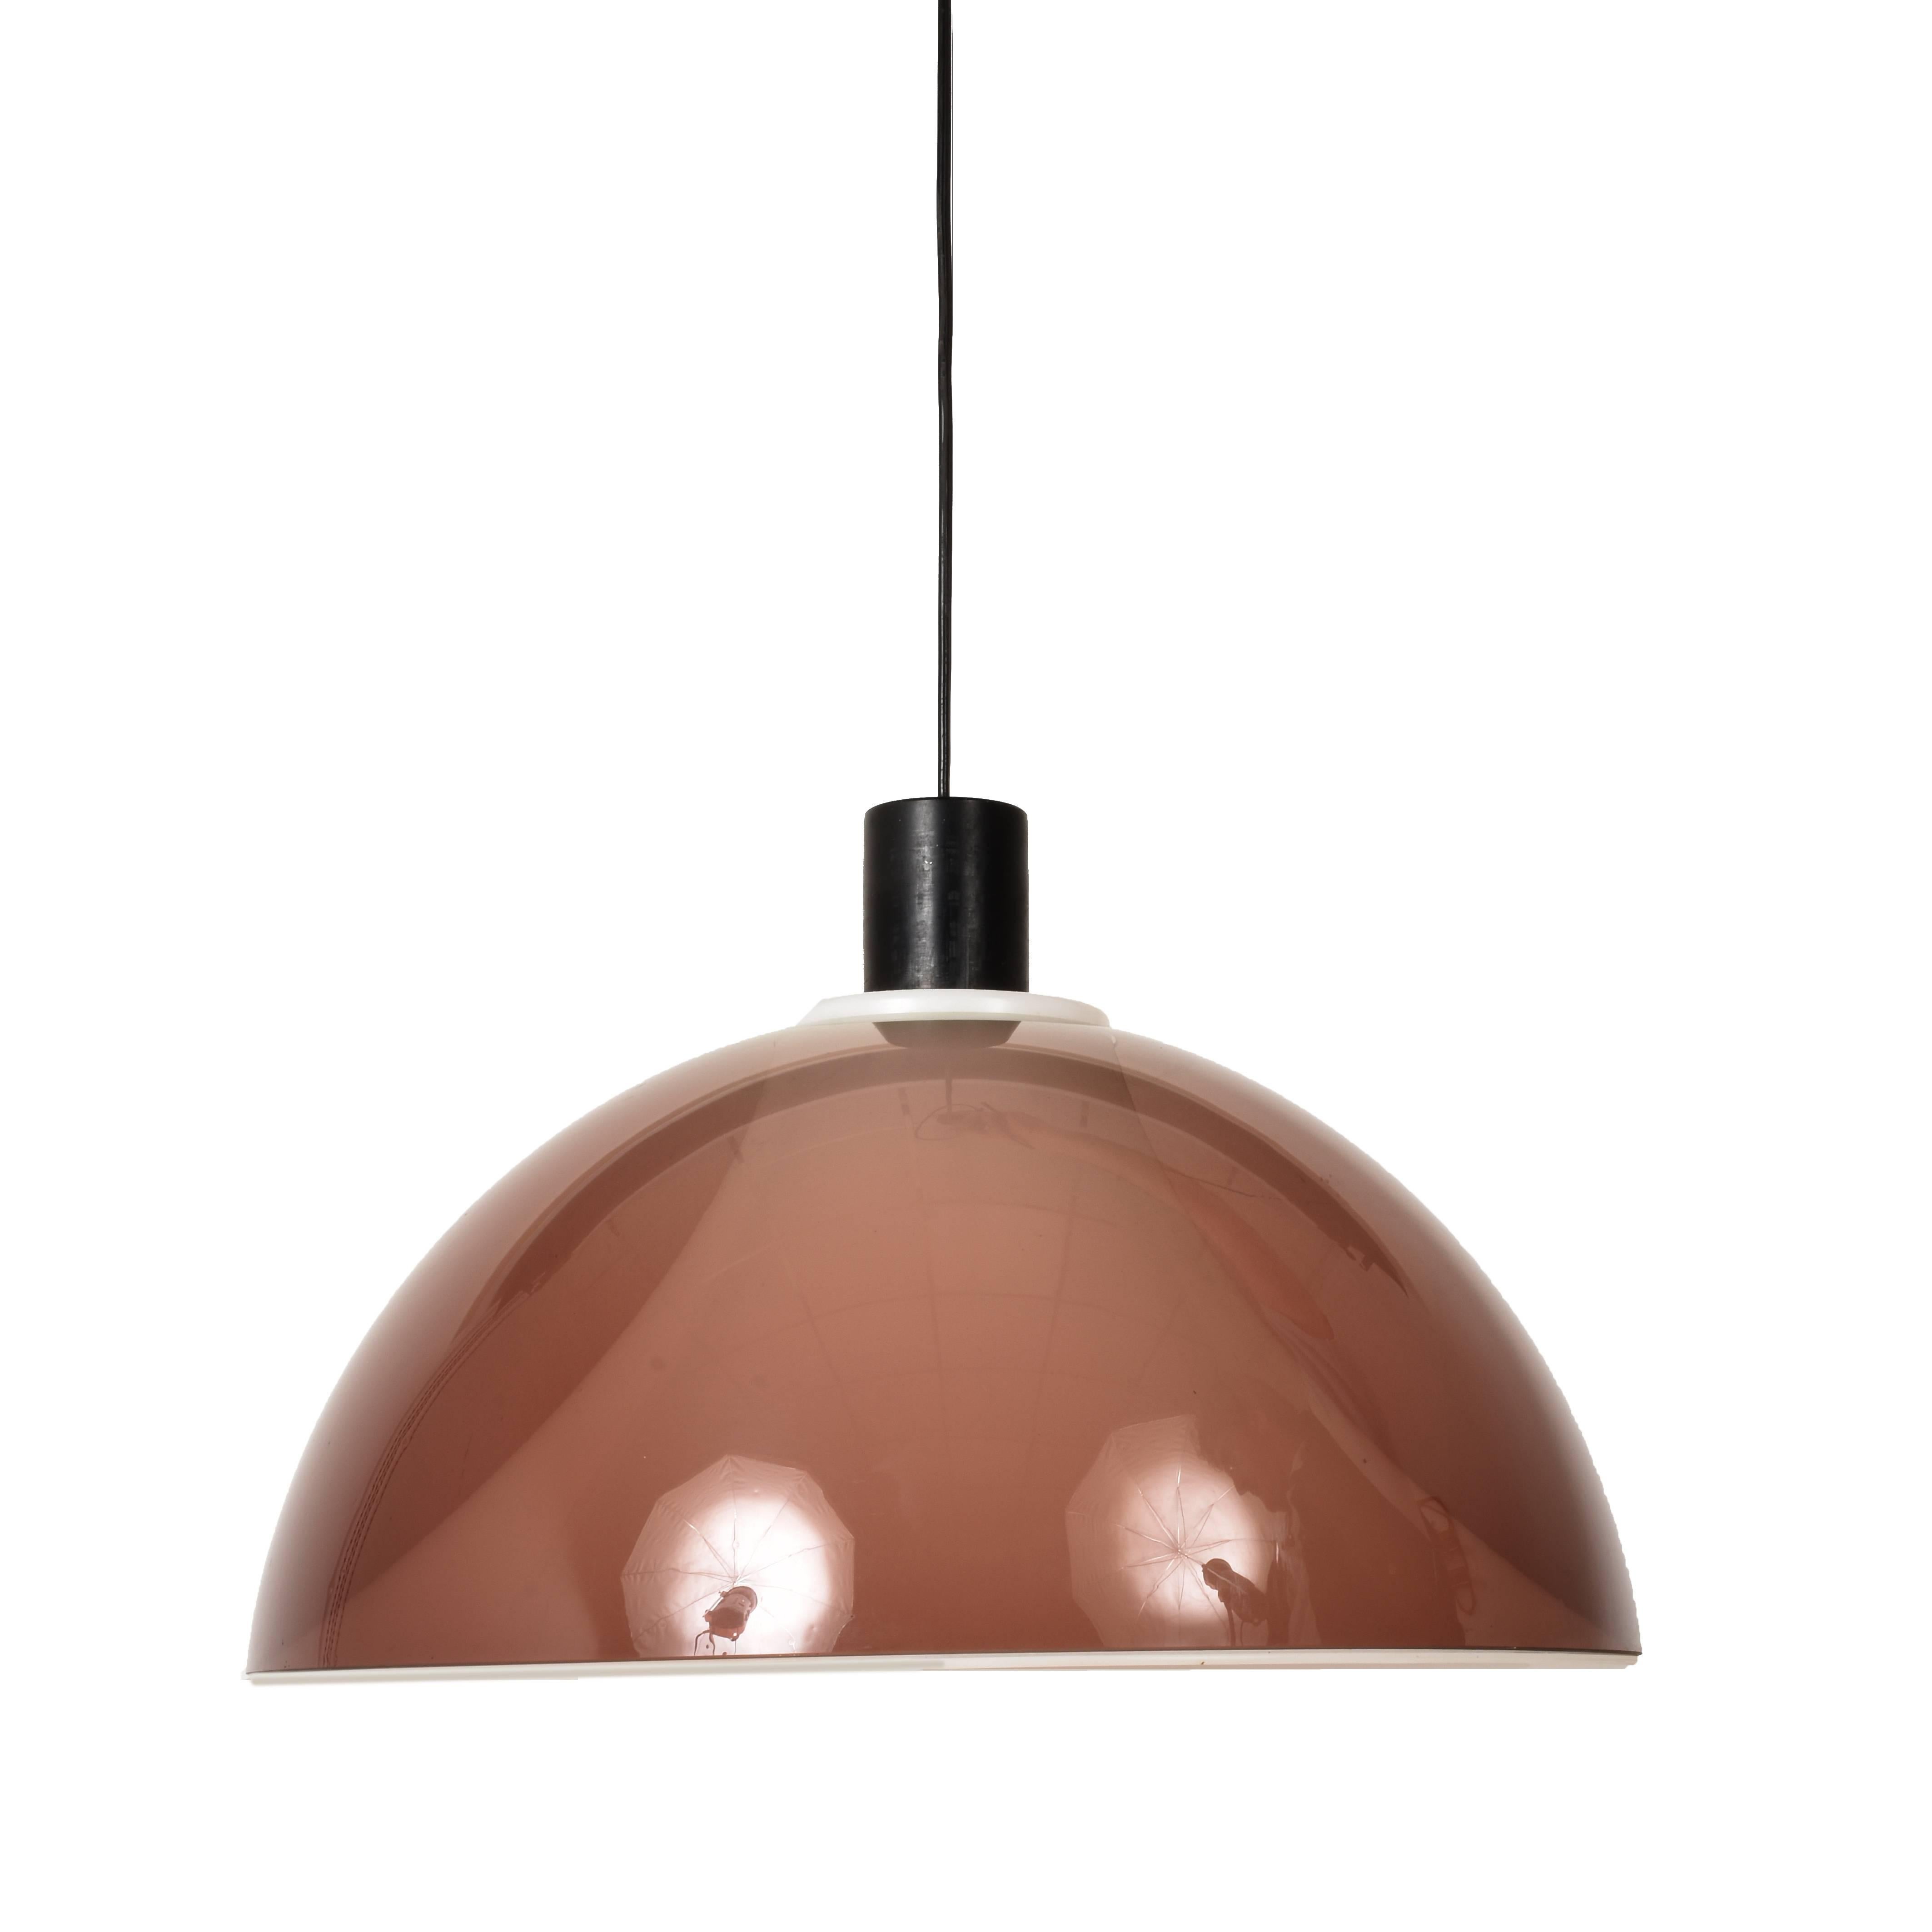 Wonderful brown and white plexiglass pendant chandelier, produced by Stilux in Italy during 1960s.

This iconic piece is signed, with its original canopy and in excellent conditions.

This amazing midcentury is perfect for a living room or a